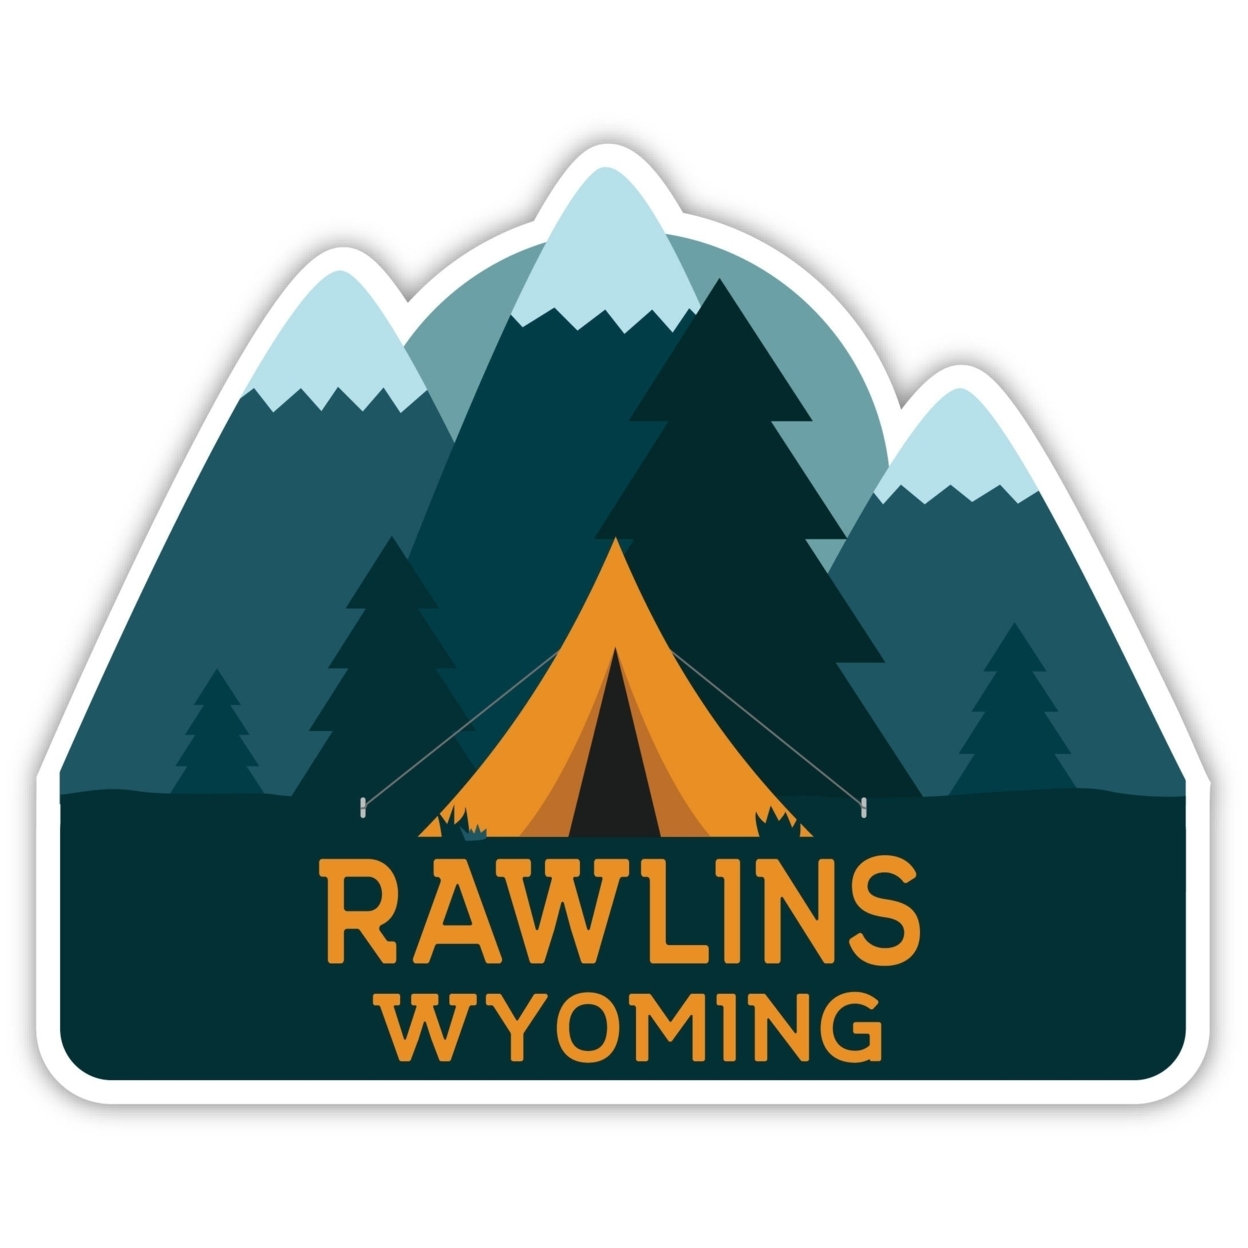 Rawlins Wyoming Souvenir Decorative Stickers (Choose Theme And Size) - Single Unit, 4-Inch, Adventures Awaits